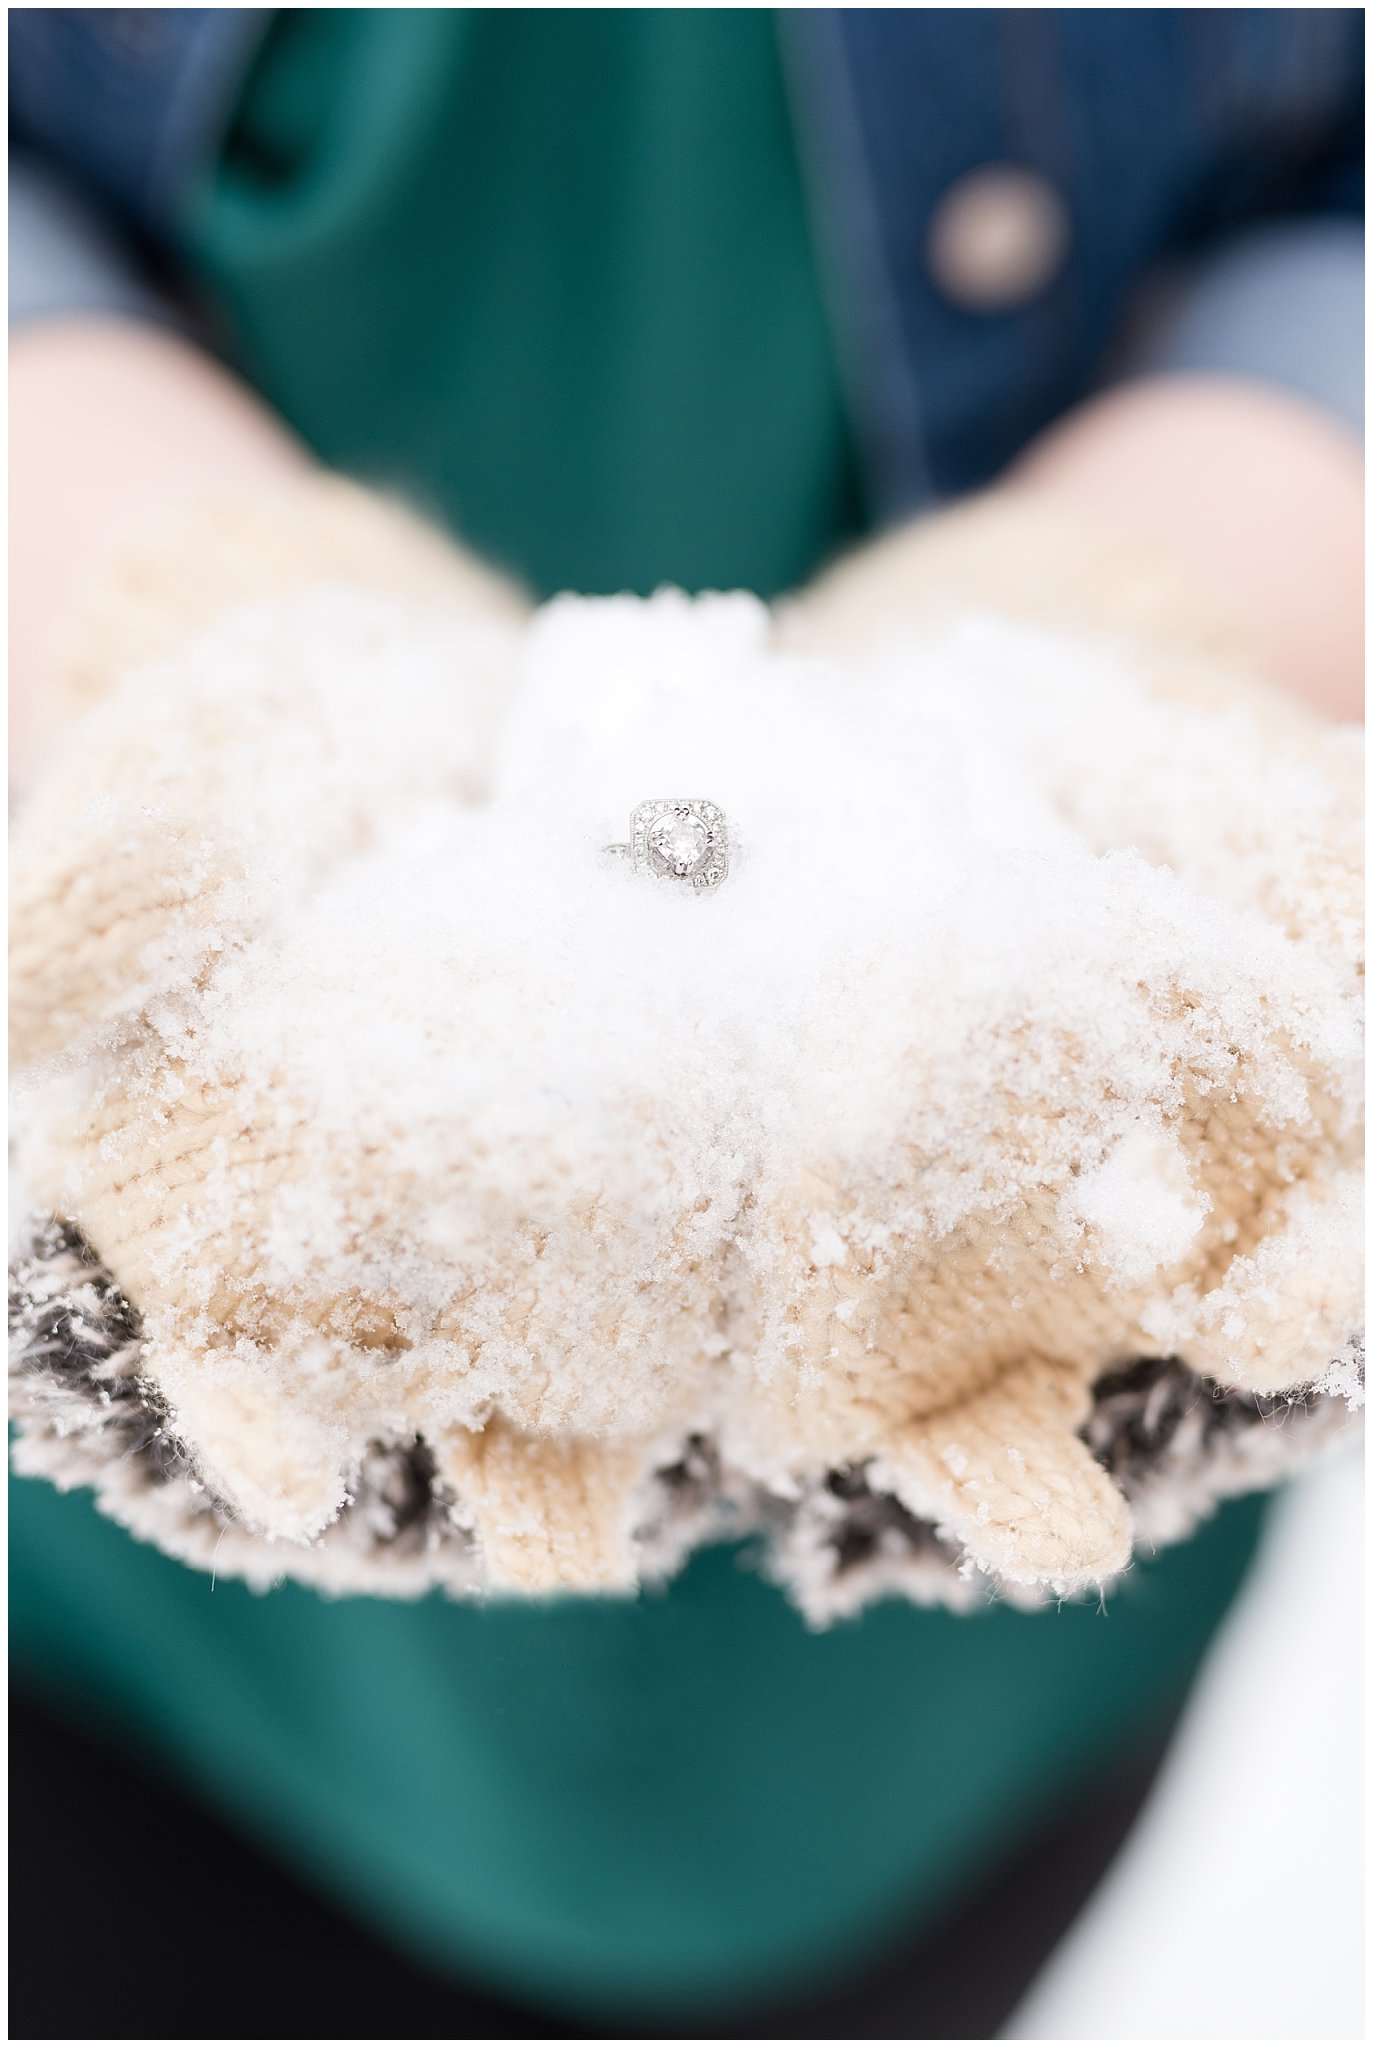 Engagement ring in snow and winter gloves | Winter Engagement at Mueller Park and the Utah State Capitol | Jessie and Dallin Photography